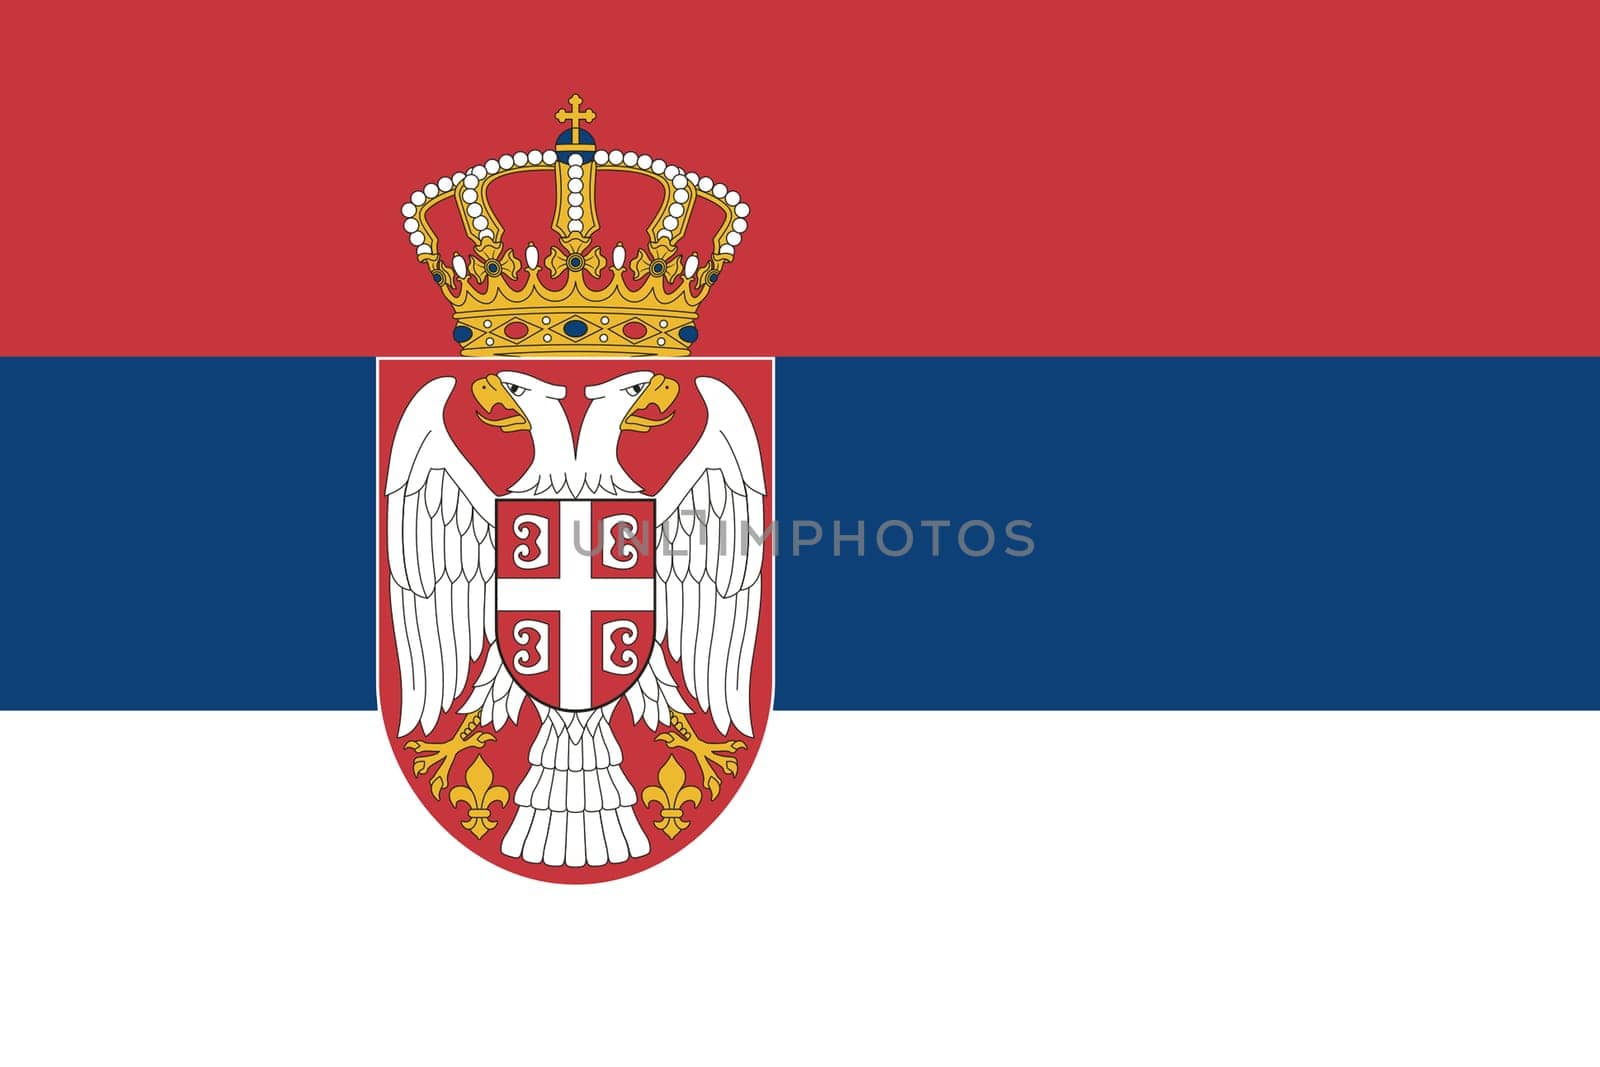 Serbia flag background illustration red blue white by VivacityImages